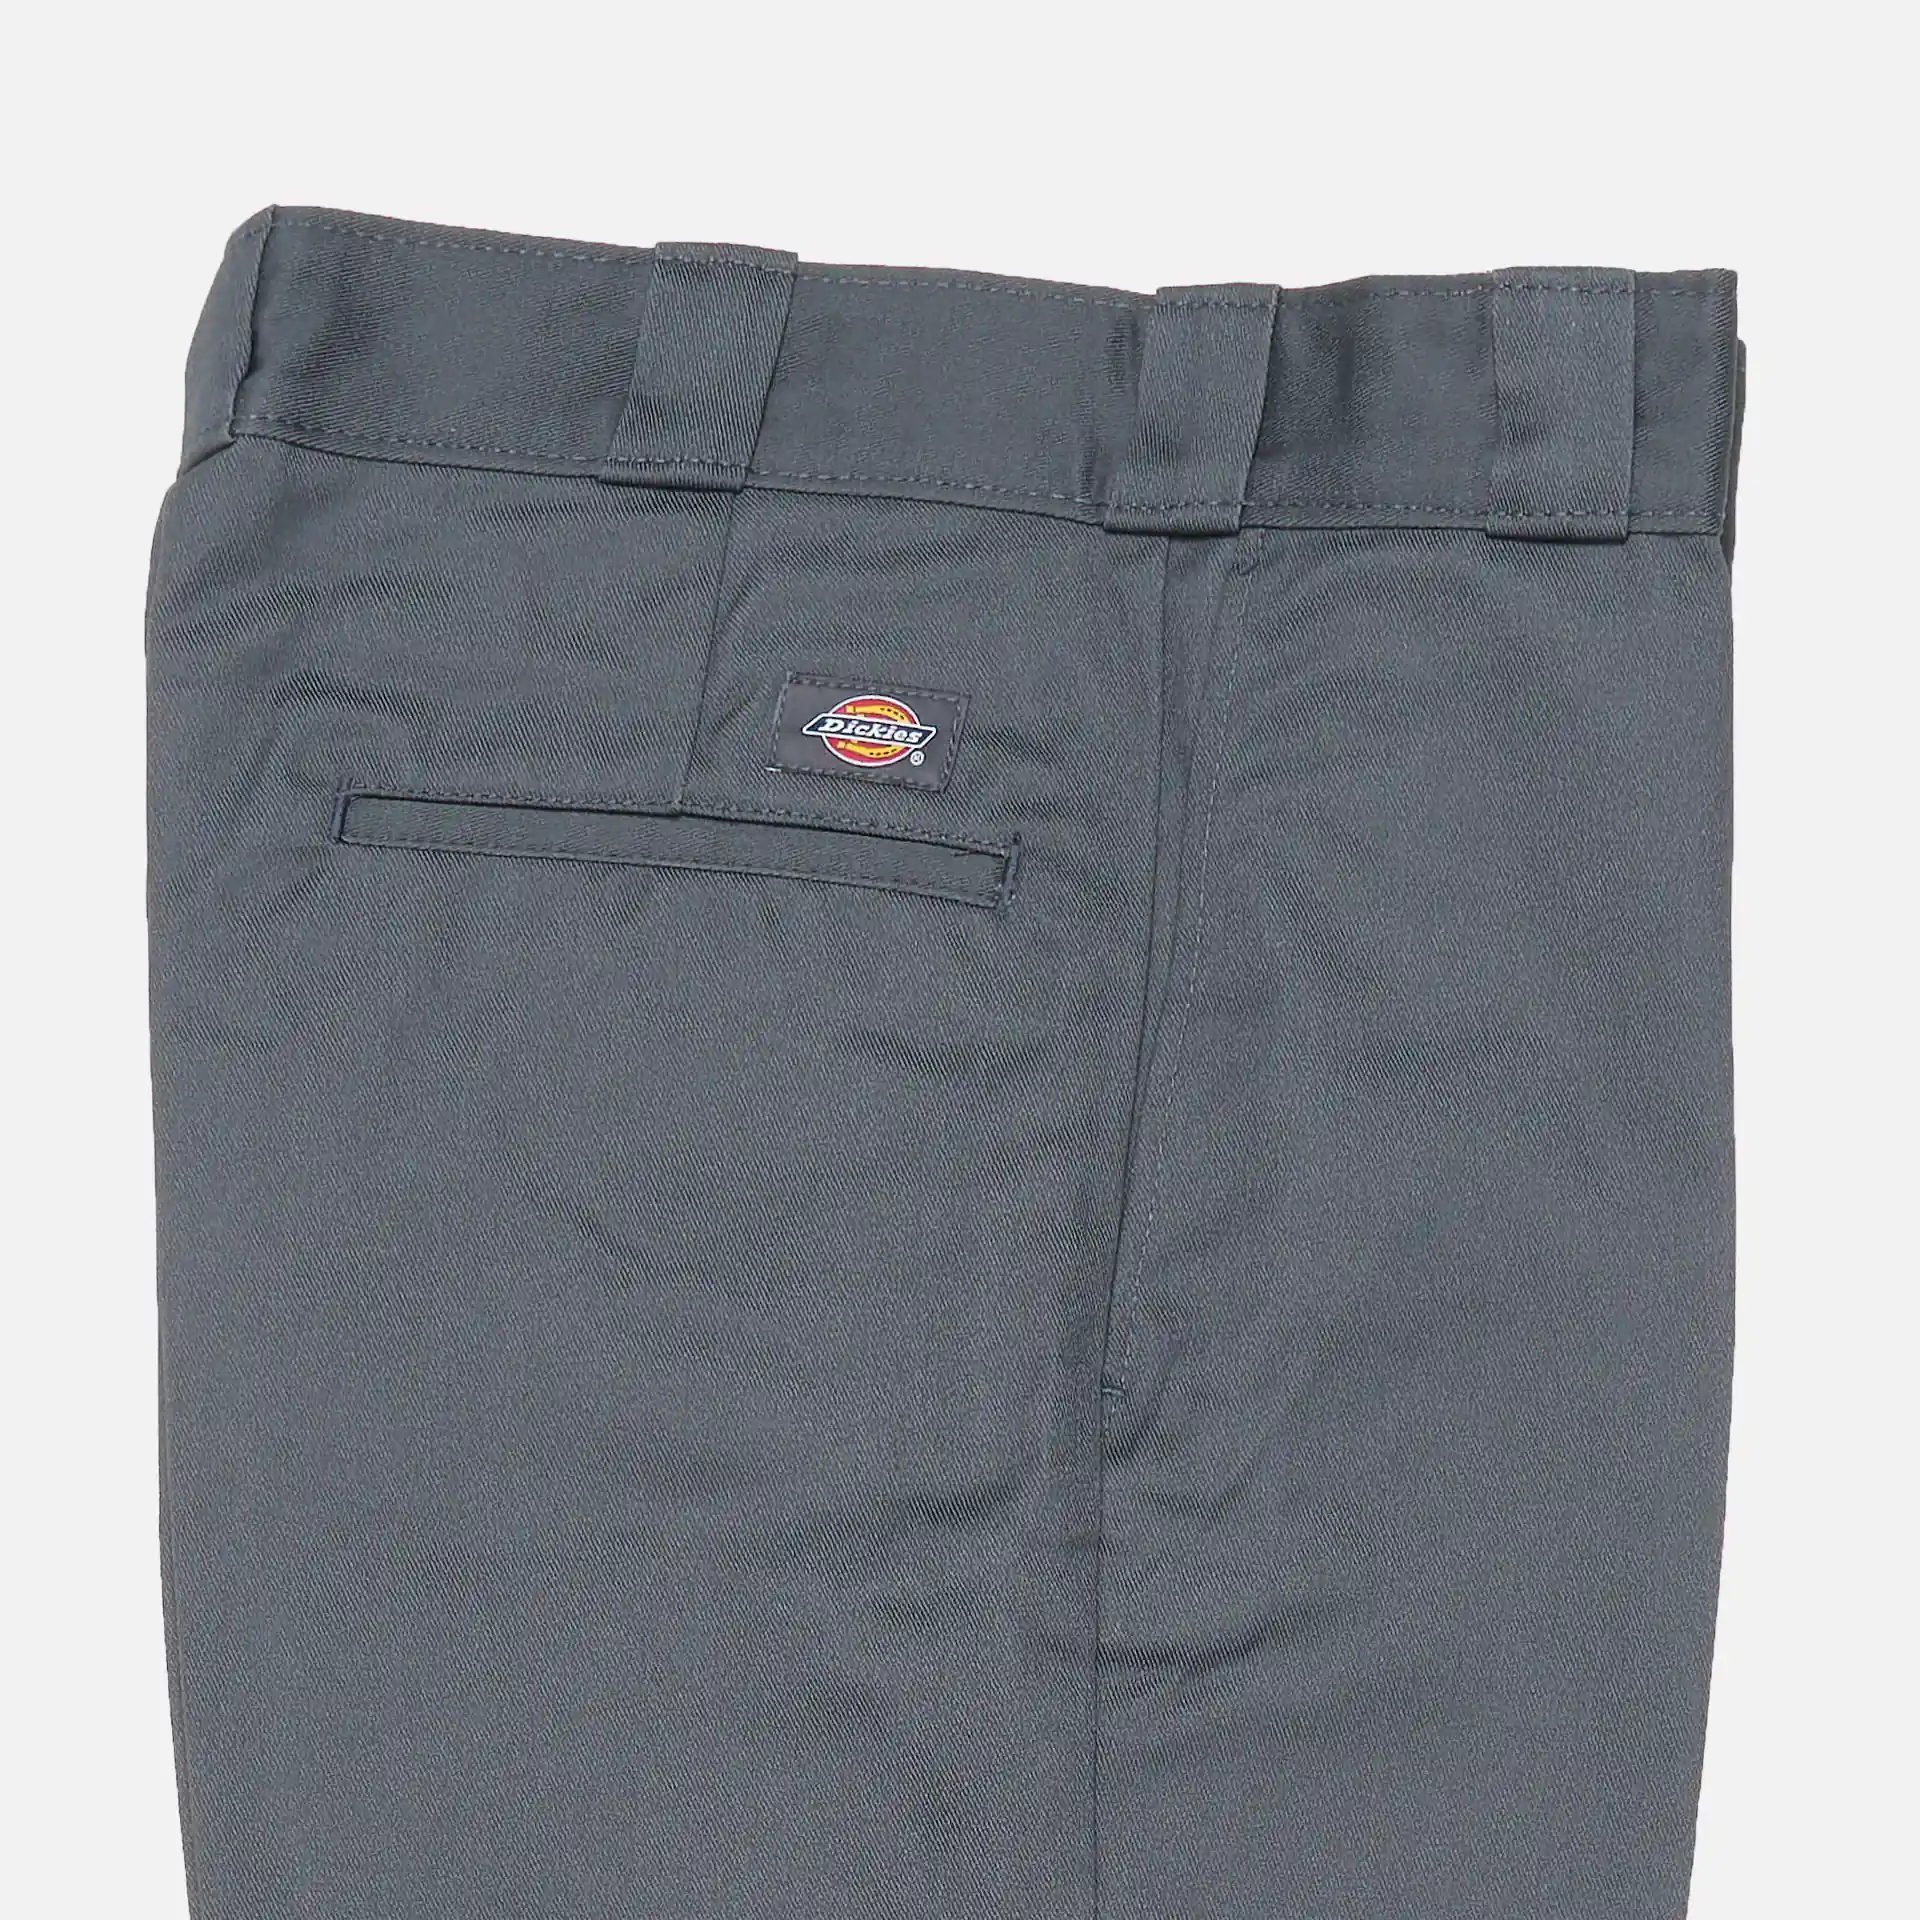 Recycled Grey Chino 874 Dickies Workwear Charcoal